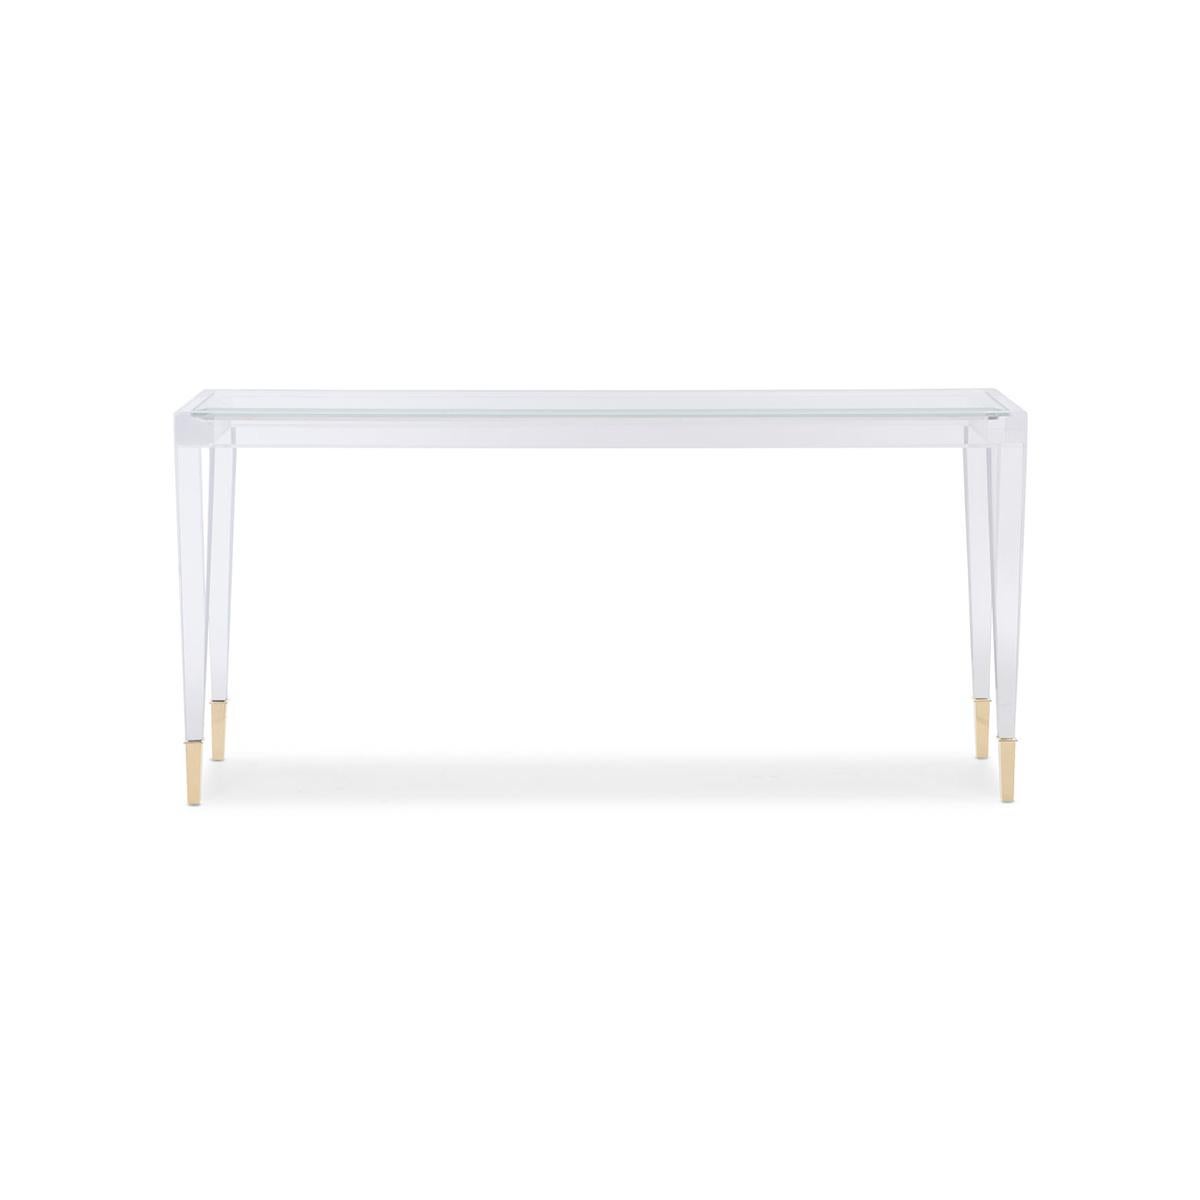 With a clear acrylic frame, its see-through design adds modern charm to a room while still feeling visually light and airy.

The rectangular shape with inset clear glass top, above square tapered legs with metal ferrules in Whisper of Gold cap its